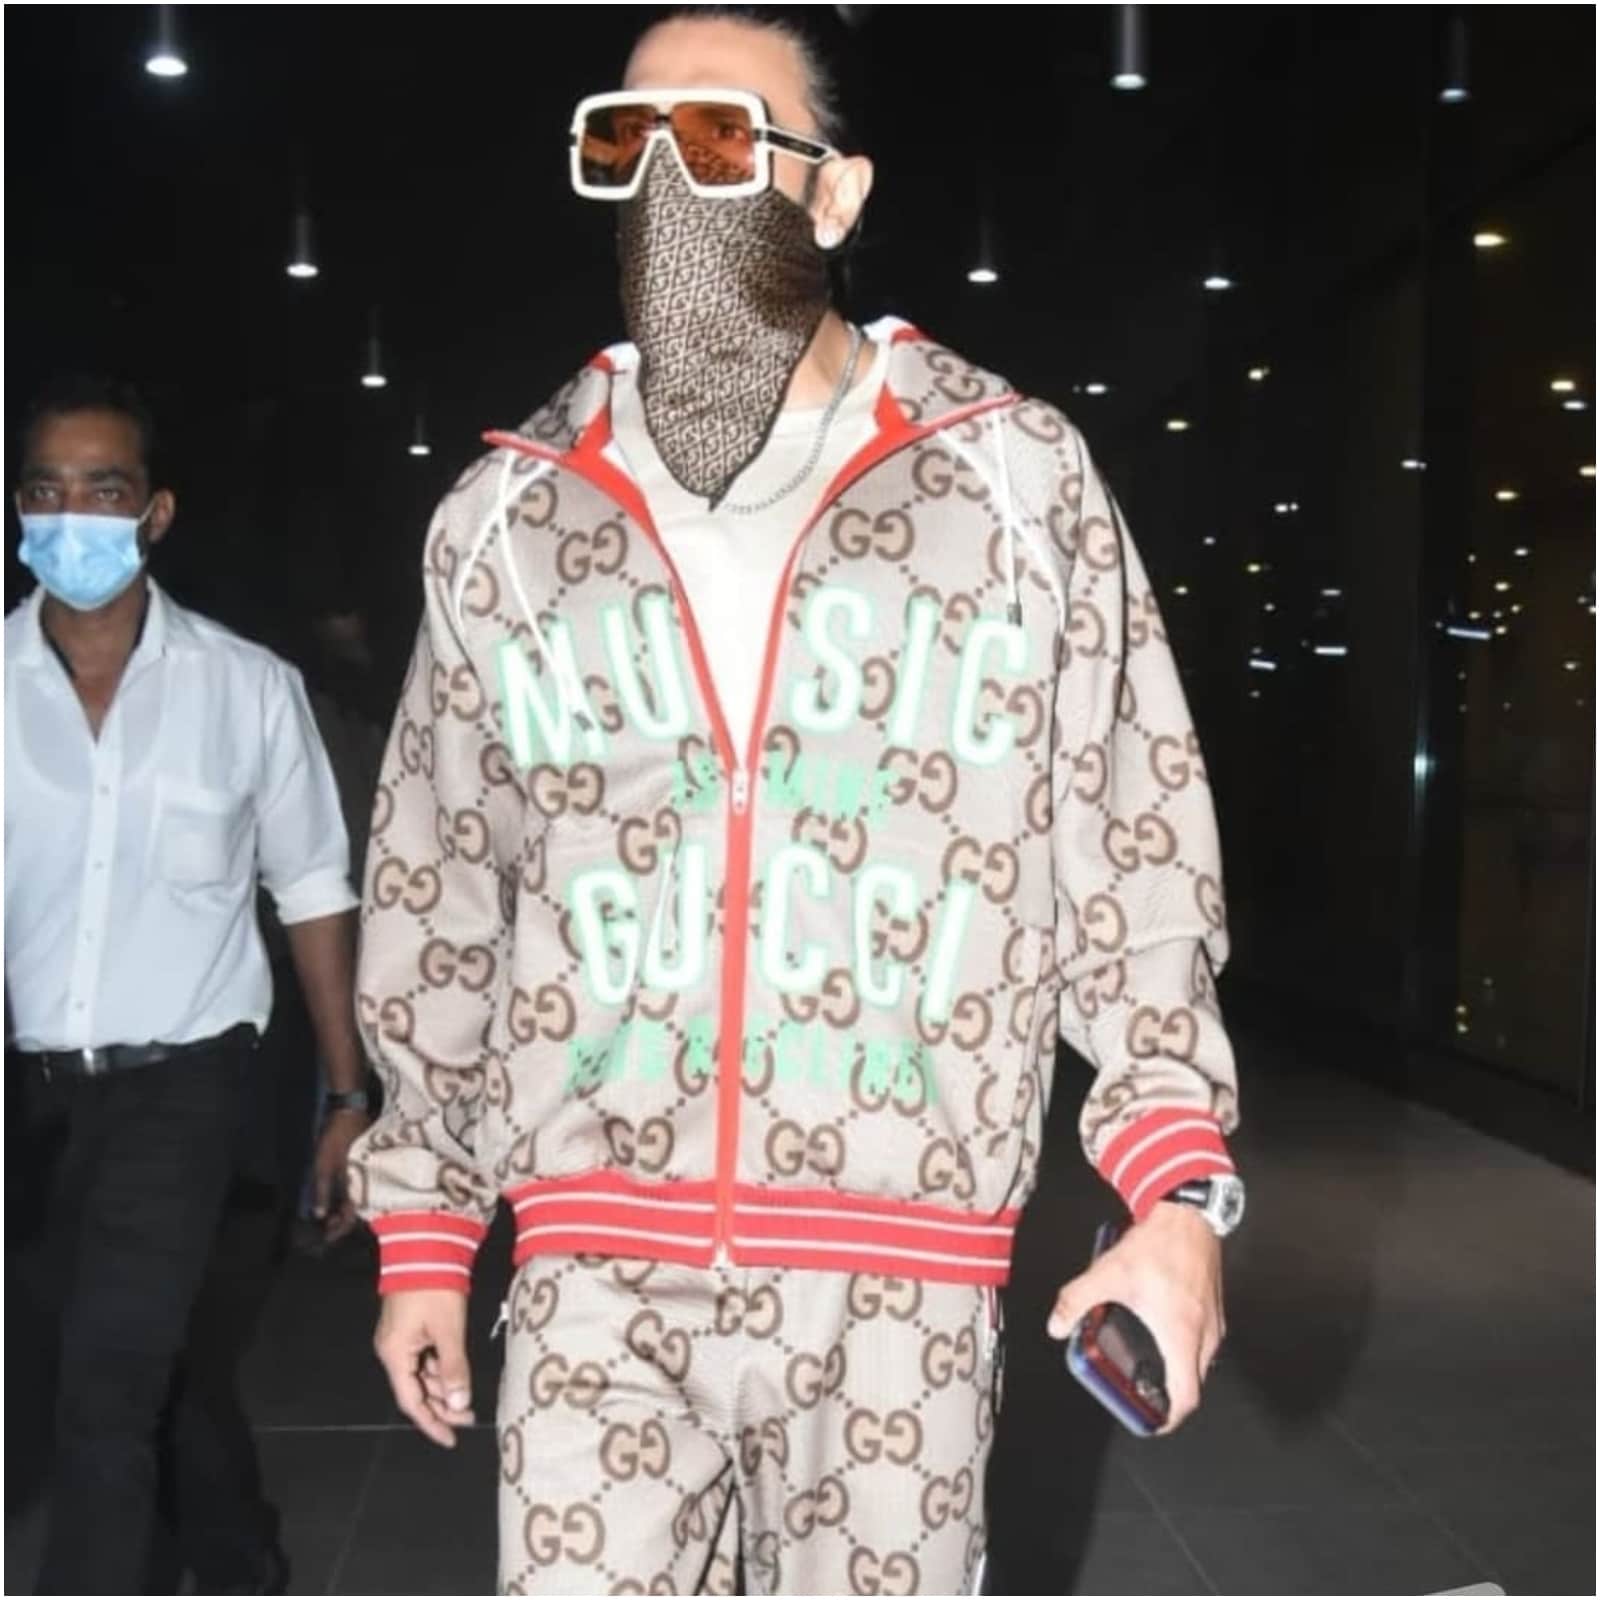 Ranveer Singh Makes A Stylish Appearance Wearing Oversized Clothes